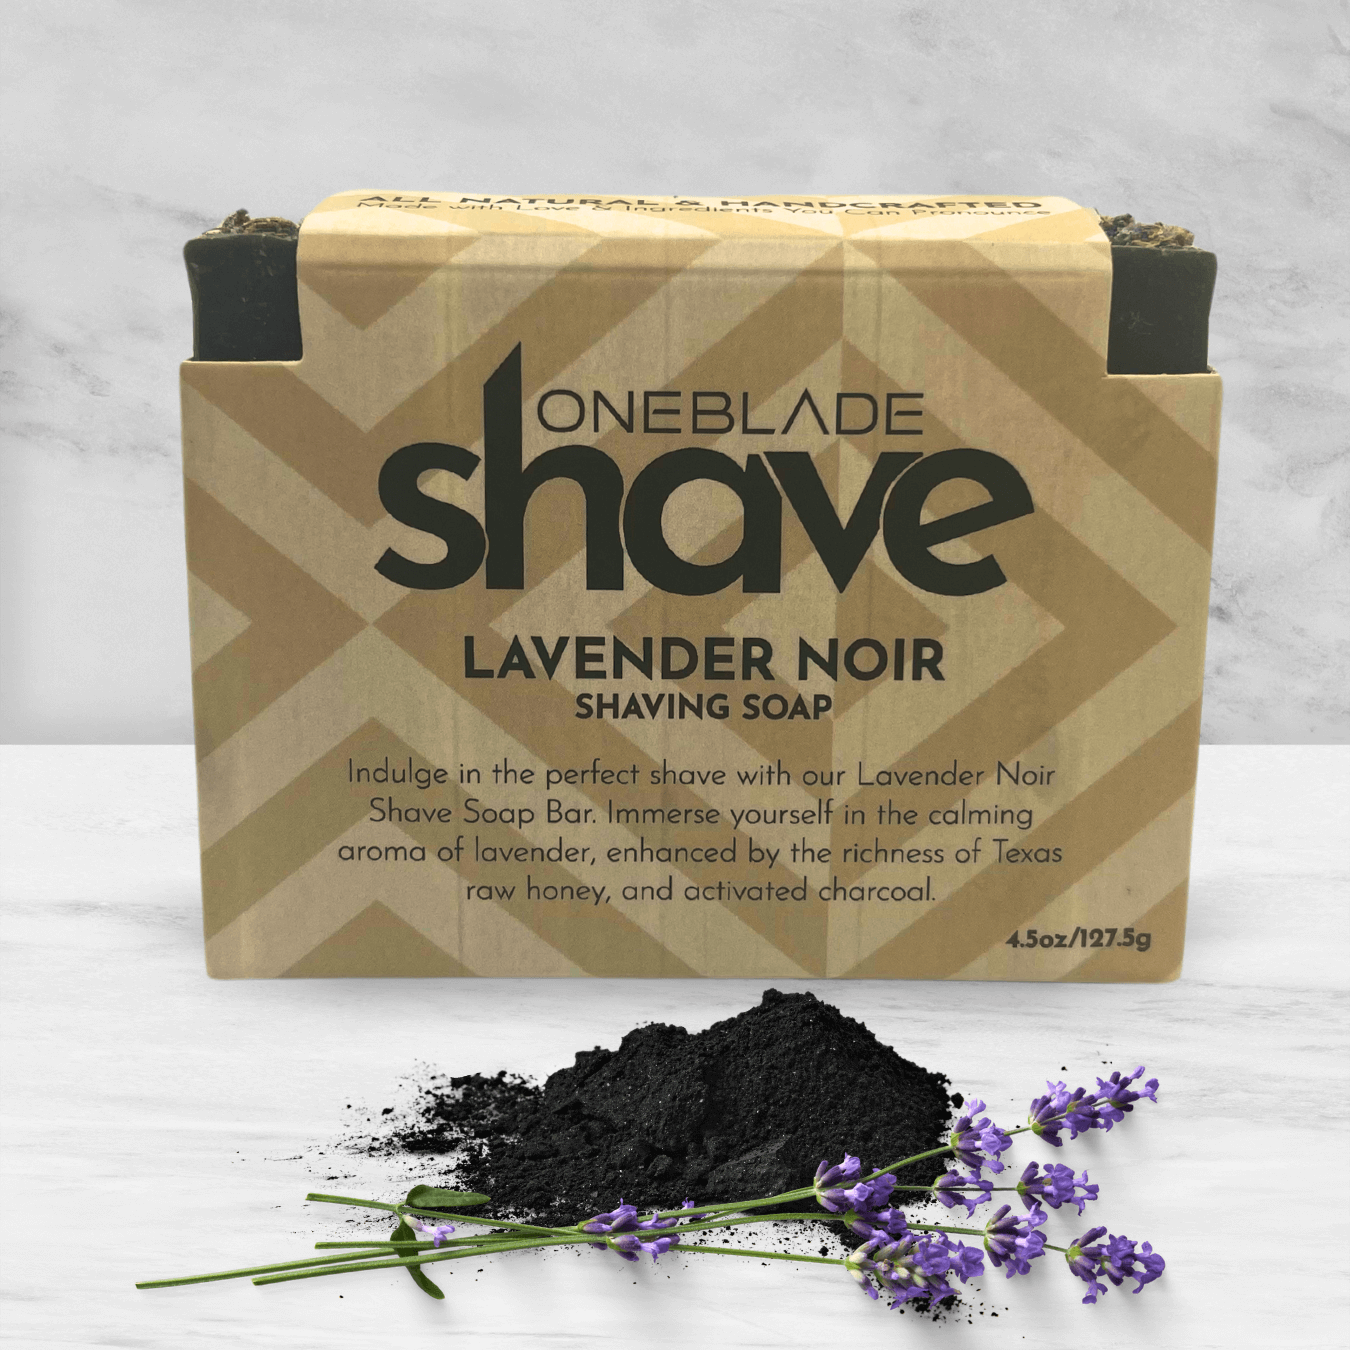 Lavender Noir Shaving Soap with Charcoal dust and flowers